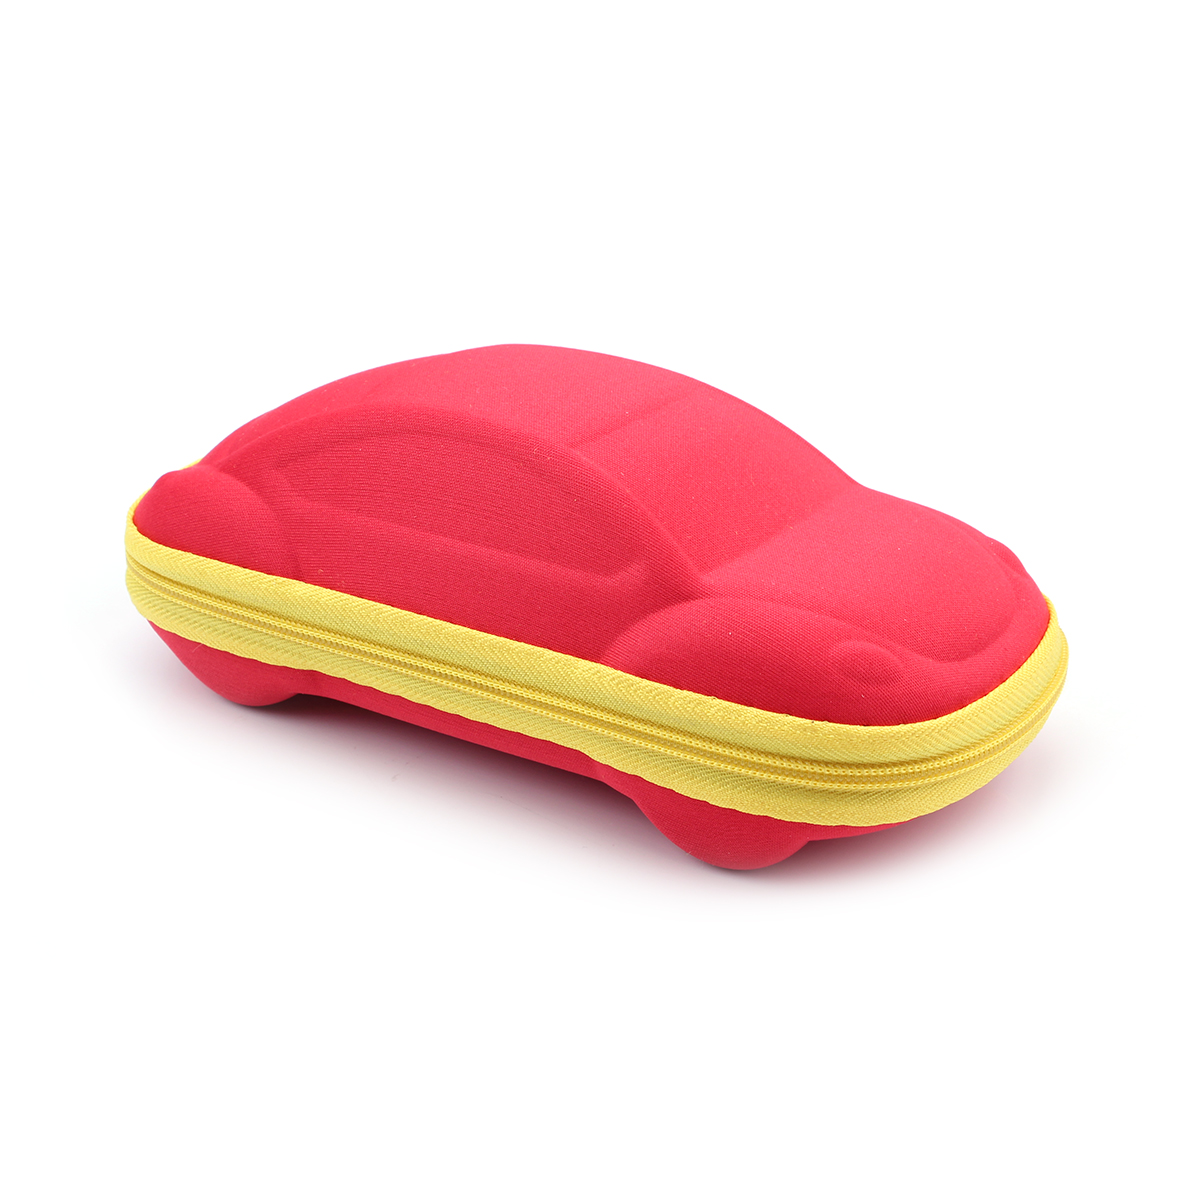 2 & Red + Yellow Chains (No Hook)2 individual a car glasses case Cartoon automobile Model children Sun glasses Box lovely zipper bag Toy box